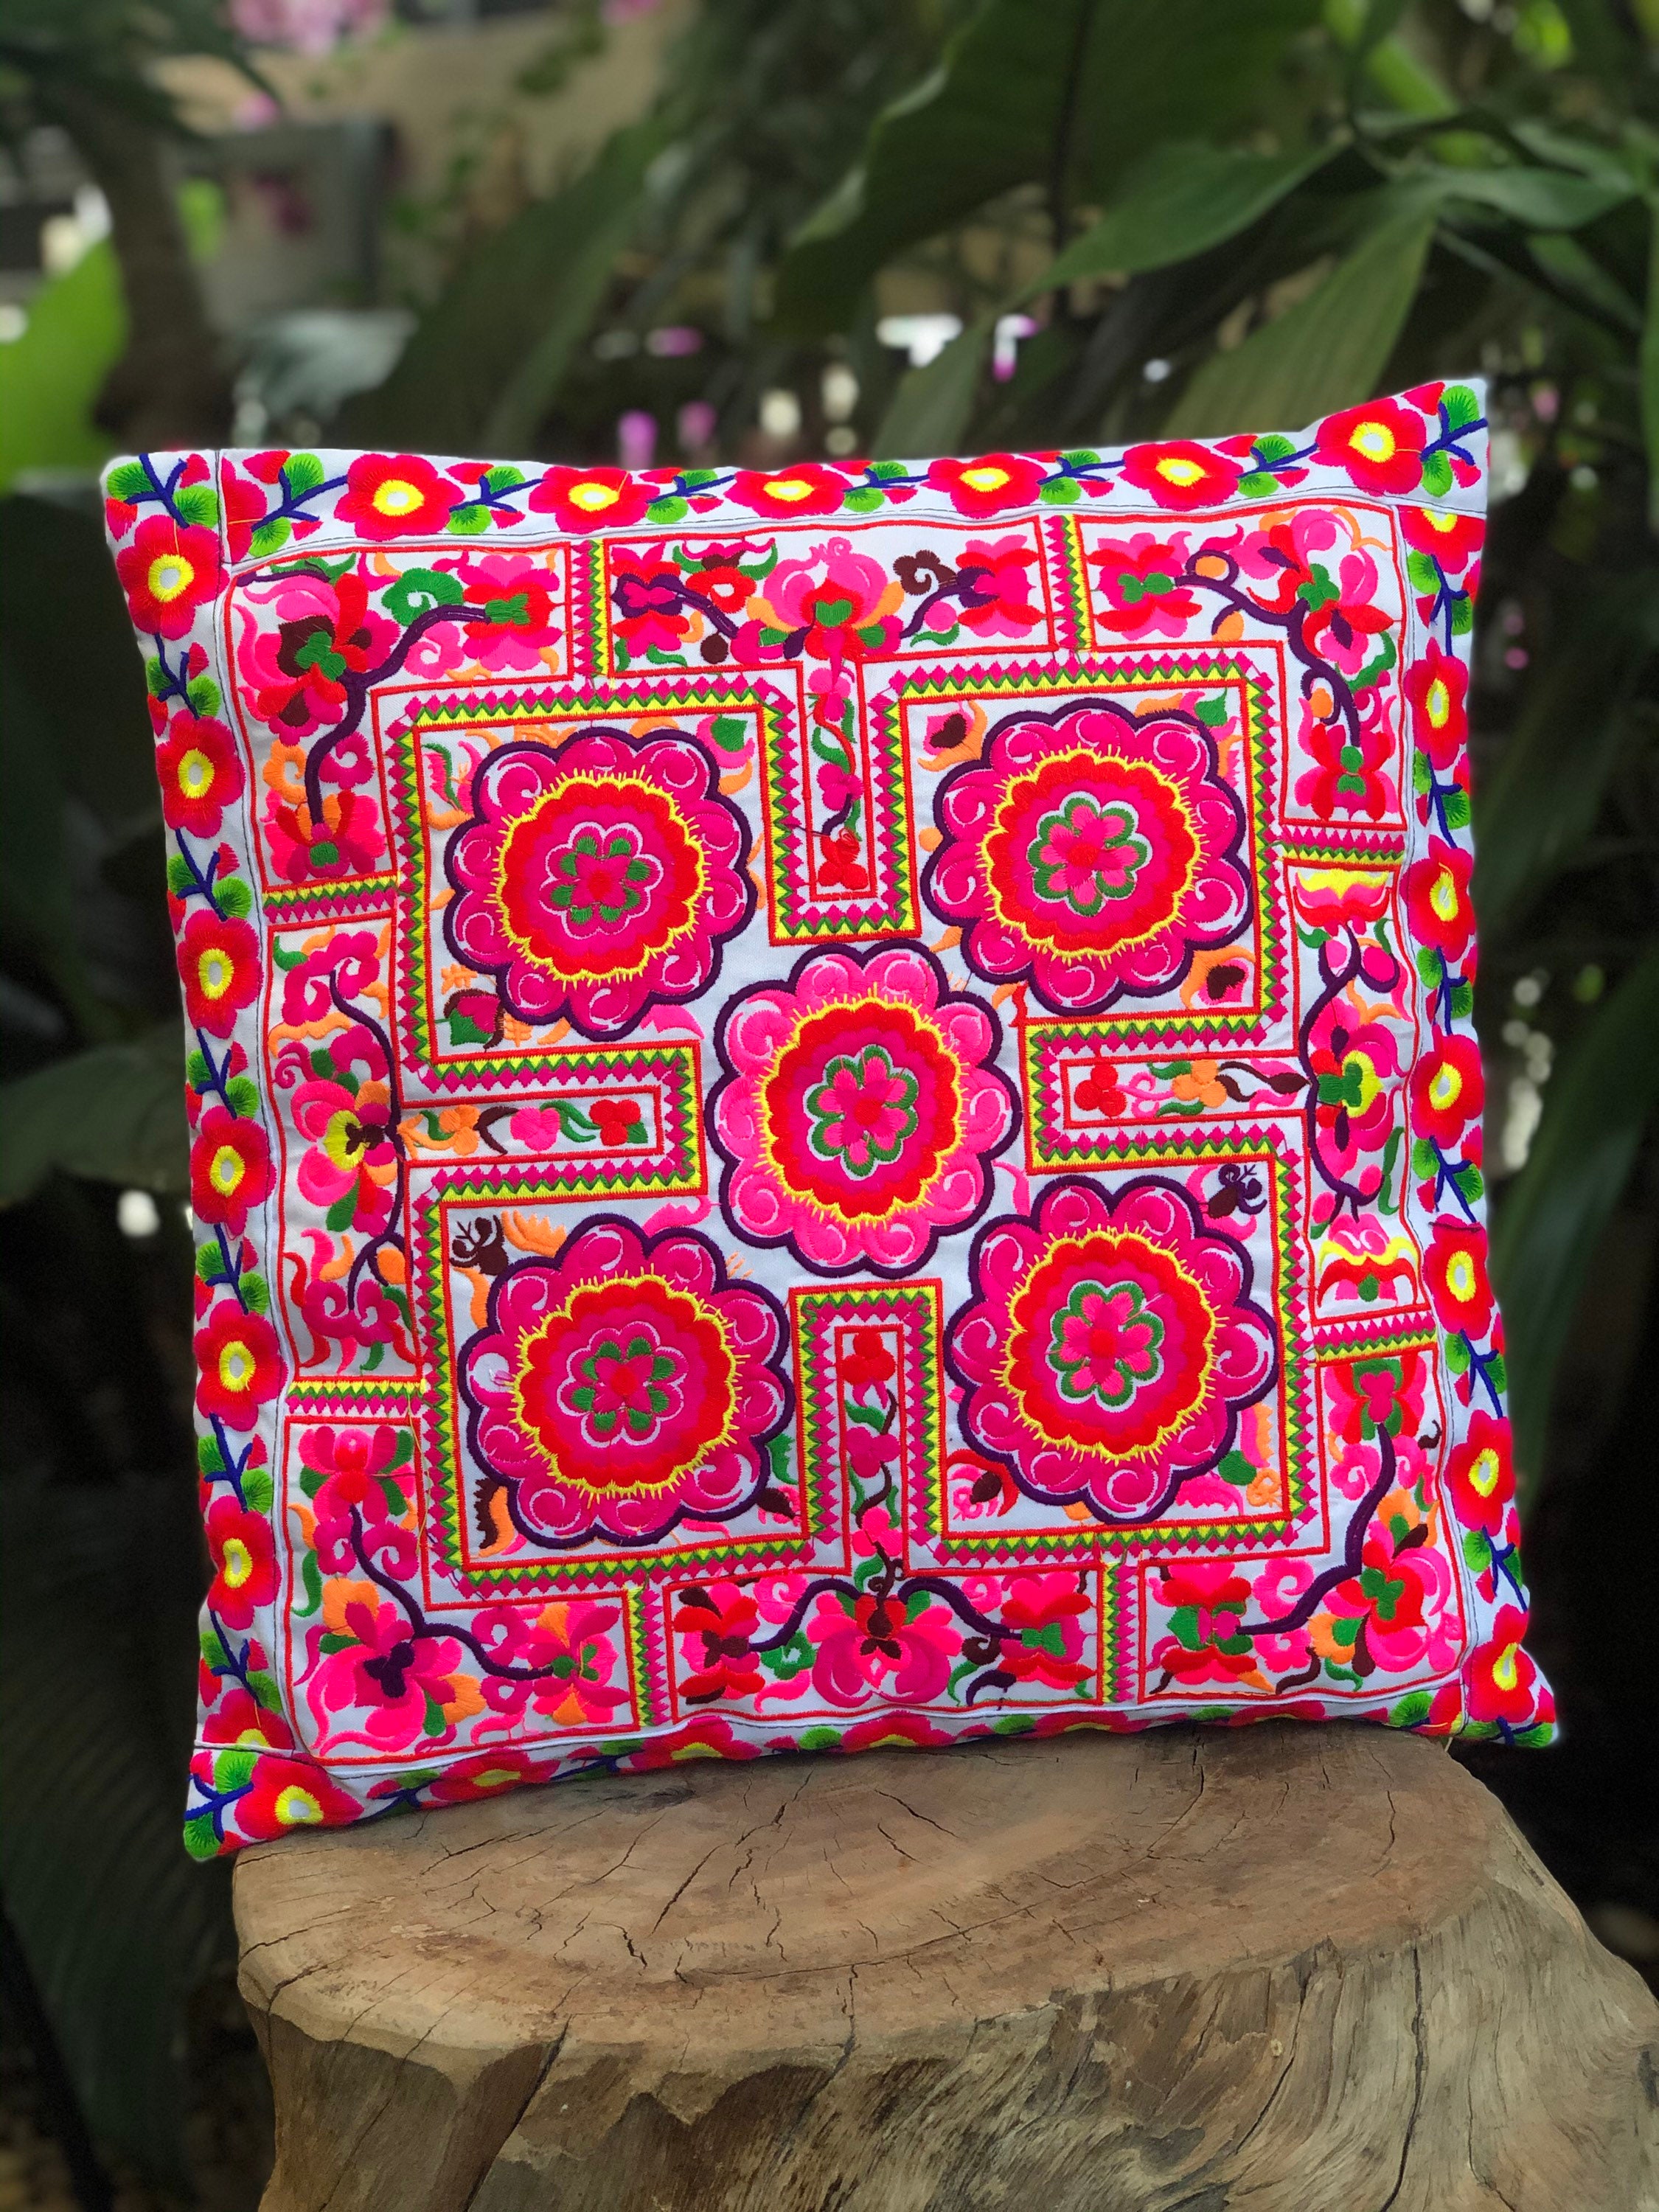 W Decor Decorative Throw Pillow Covers Embroidery Bohemian Design